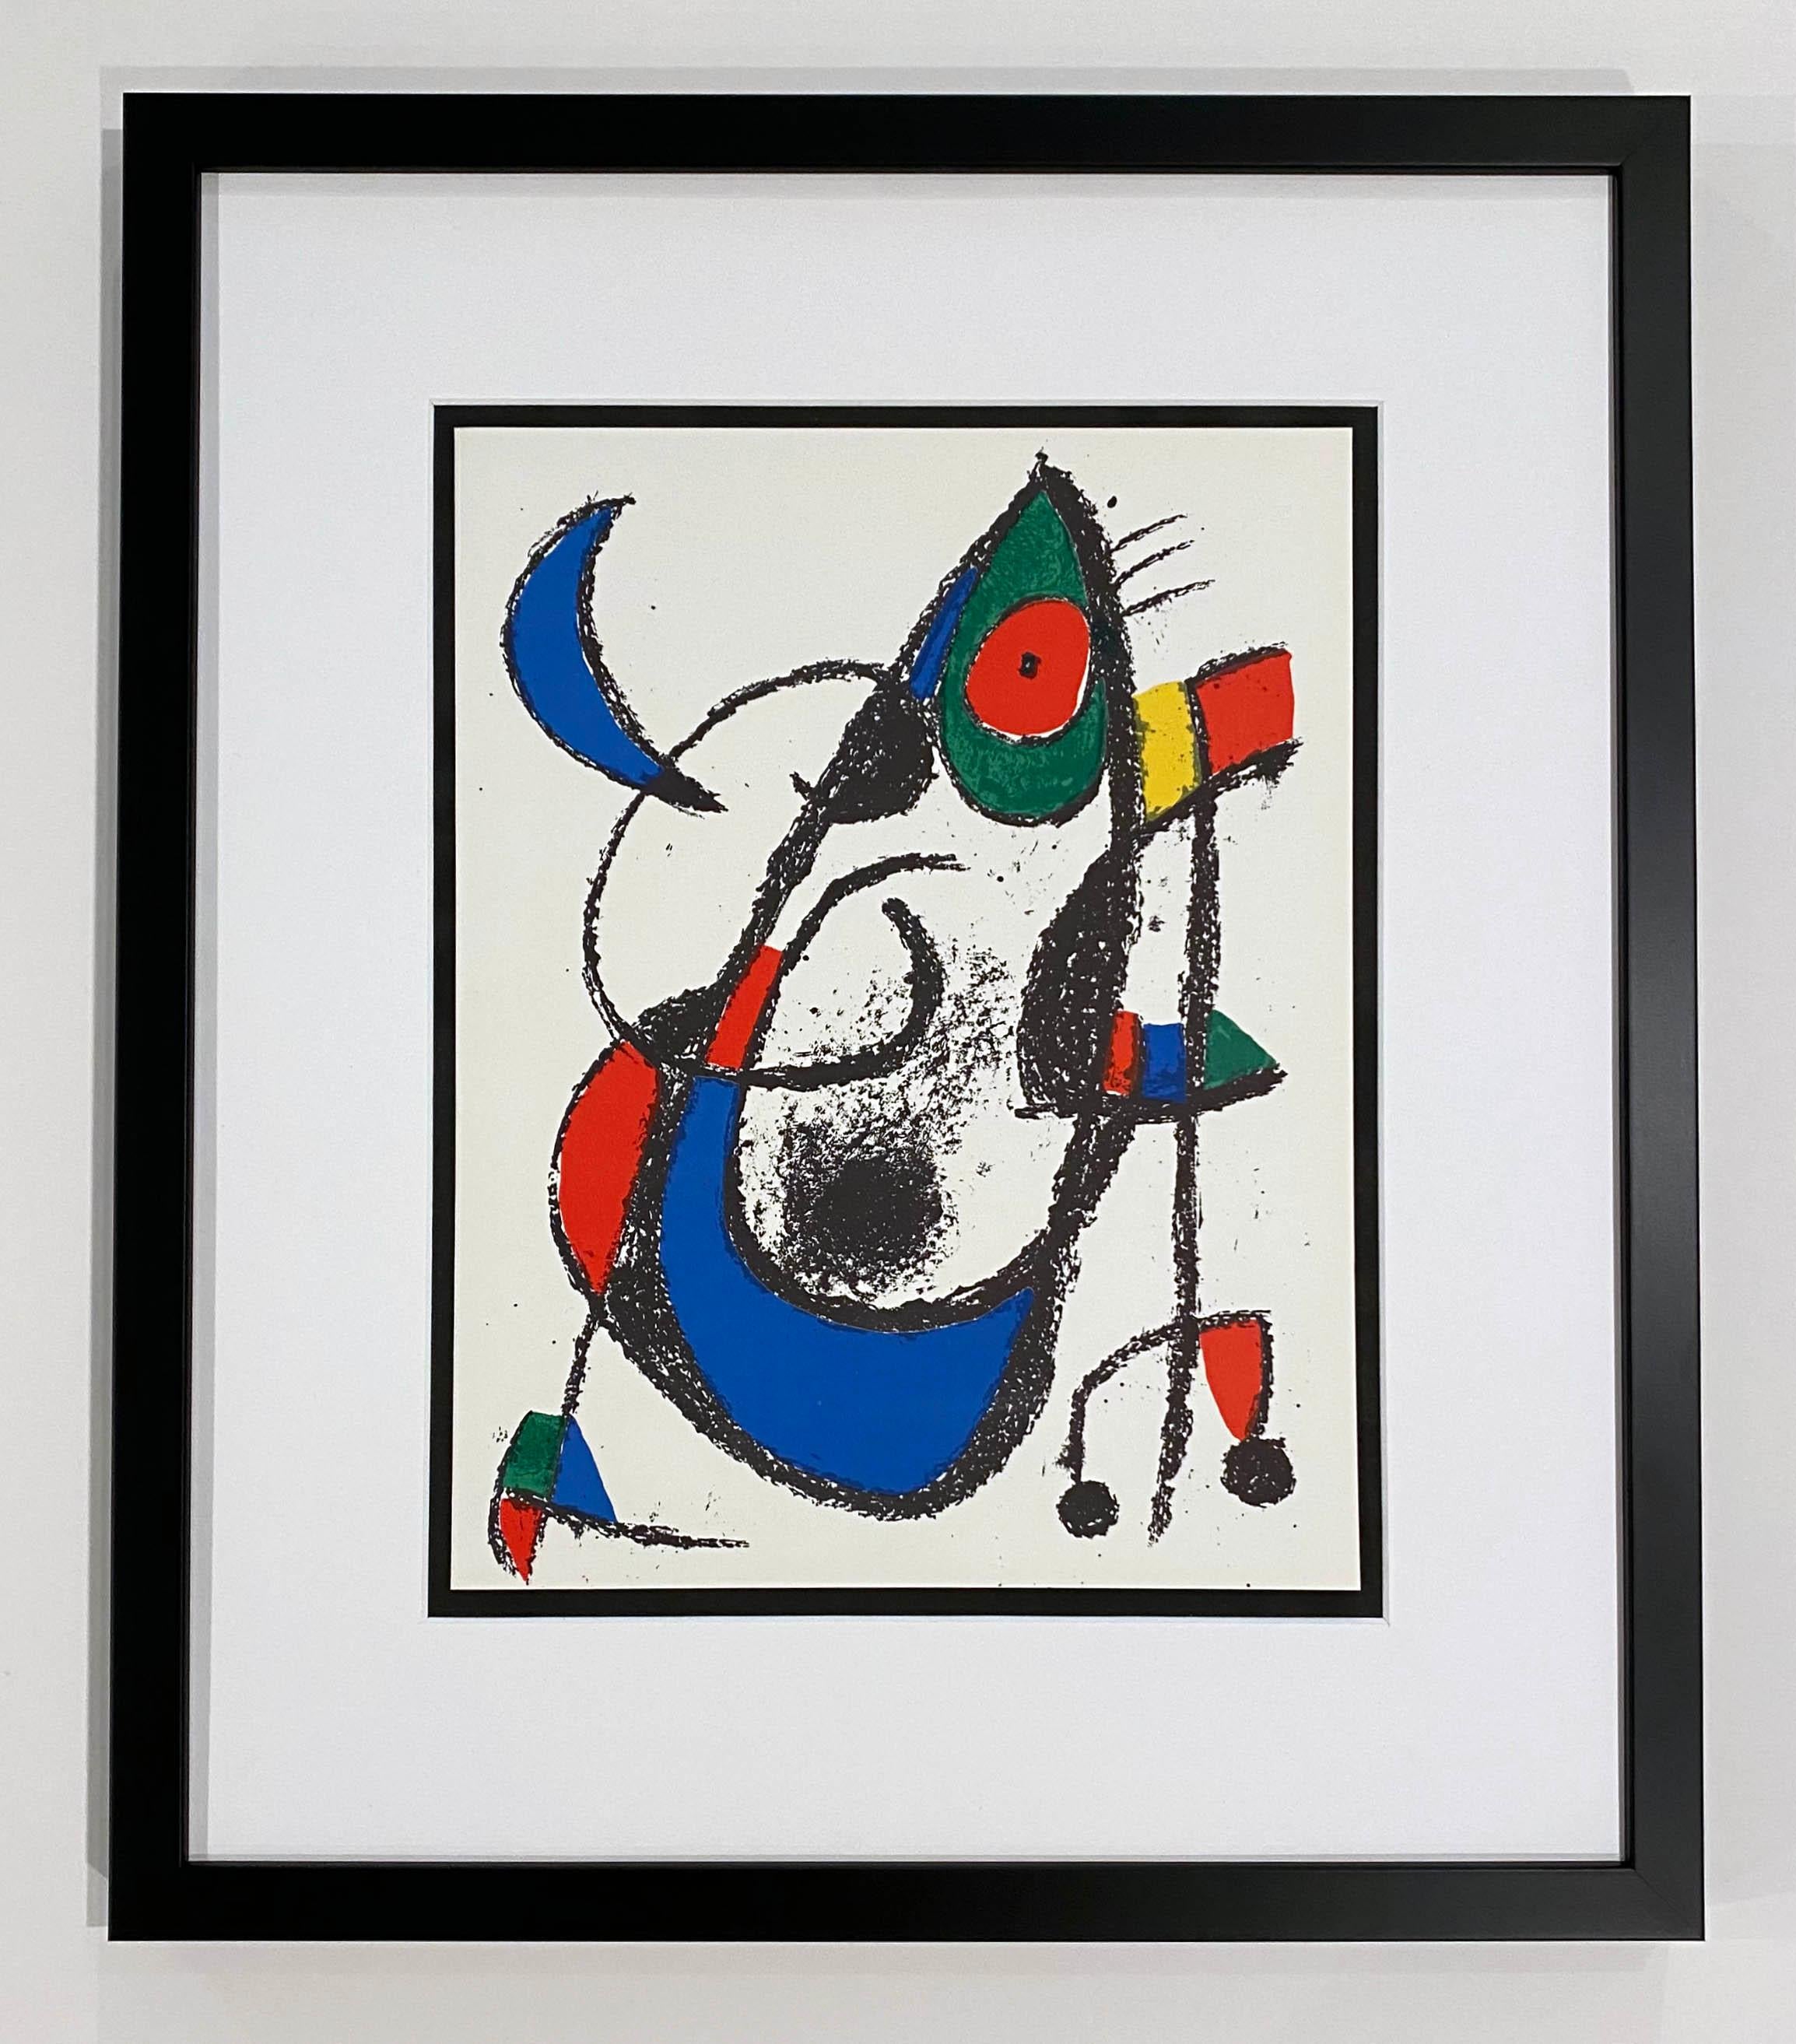 Plate XI, from 1975 Lithographe II - Print by Joan Miró